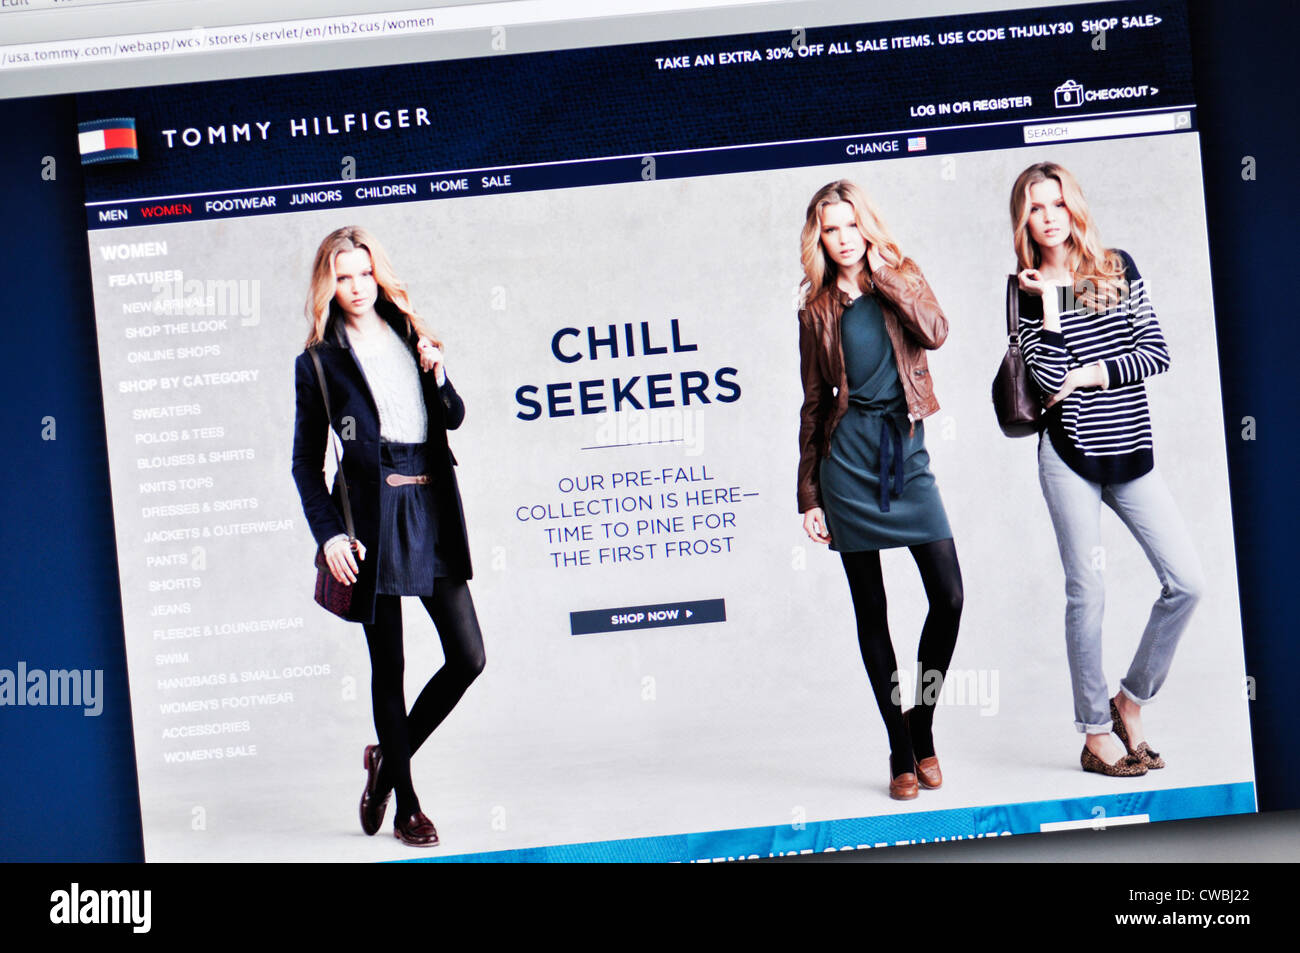 Tommy Hilfiger website - clothing, shoes and accessories Stock Photo - Alamy